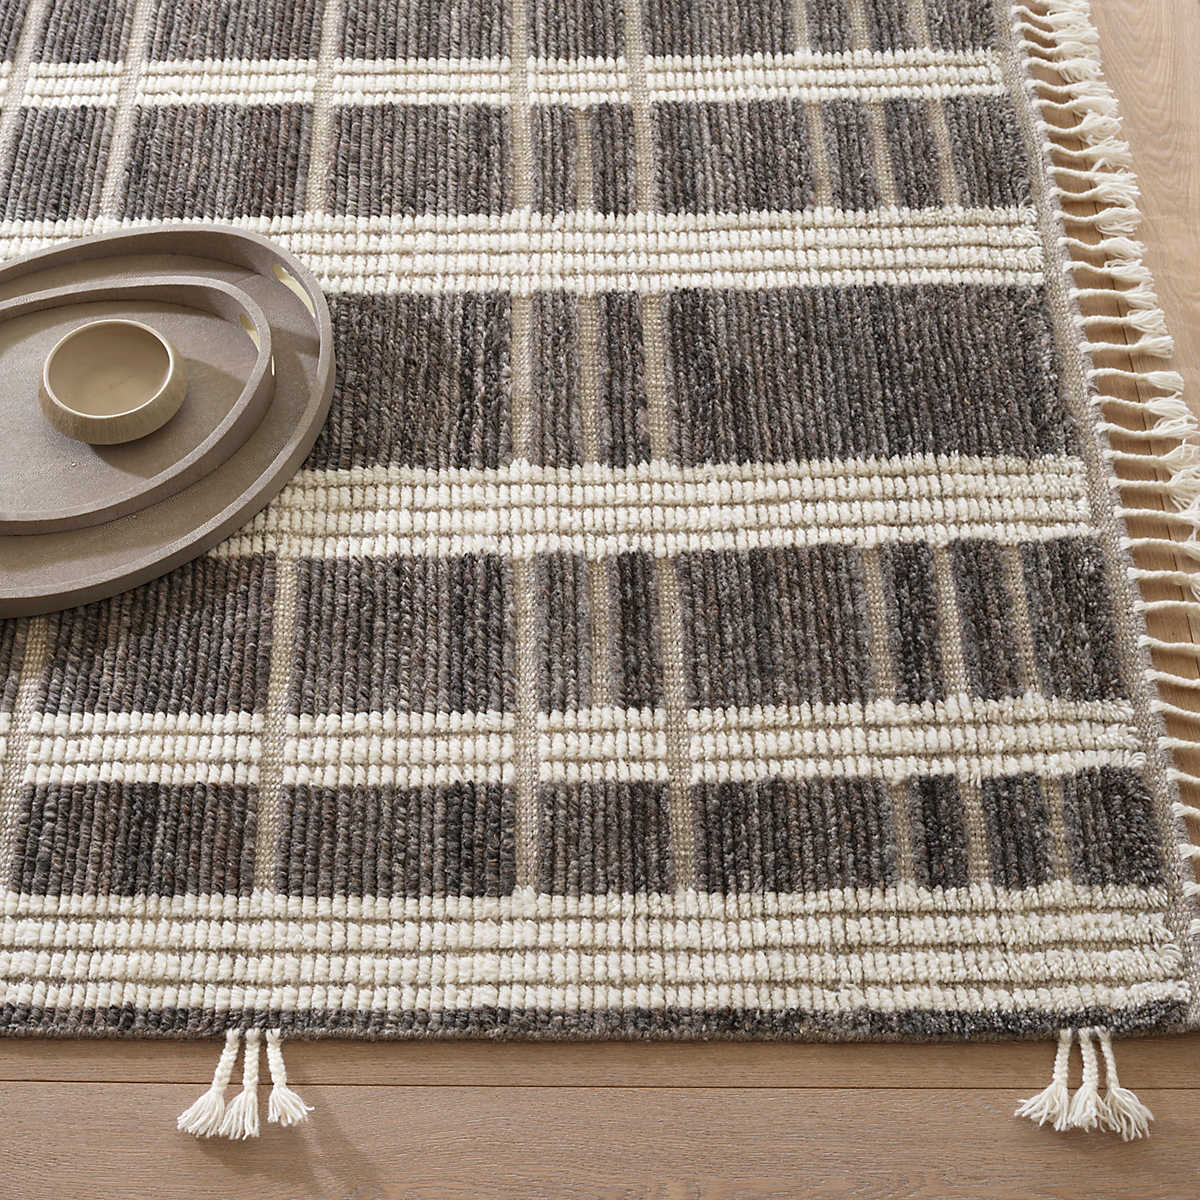 The Tory Grey/Ivory Rug stripes of Ivory fleece alternate with raised bands of naturally colored, mélange Charcoal wool. Interspersed by low-profile, woven taupe boundaries that bring rhythm to the textural blocks. Length sides are lightened with funky, bohemian braided tassels that add whimsy. Amethyst Home provides interior design services, furniture, rugs, and lighting in the Miami metro area.